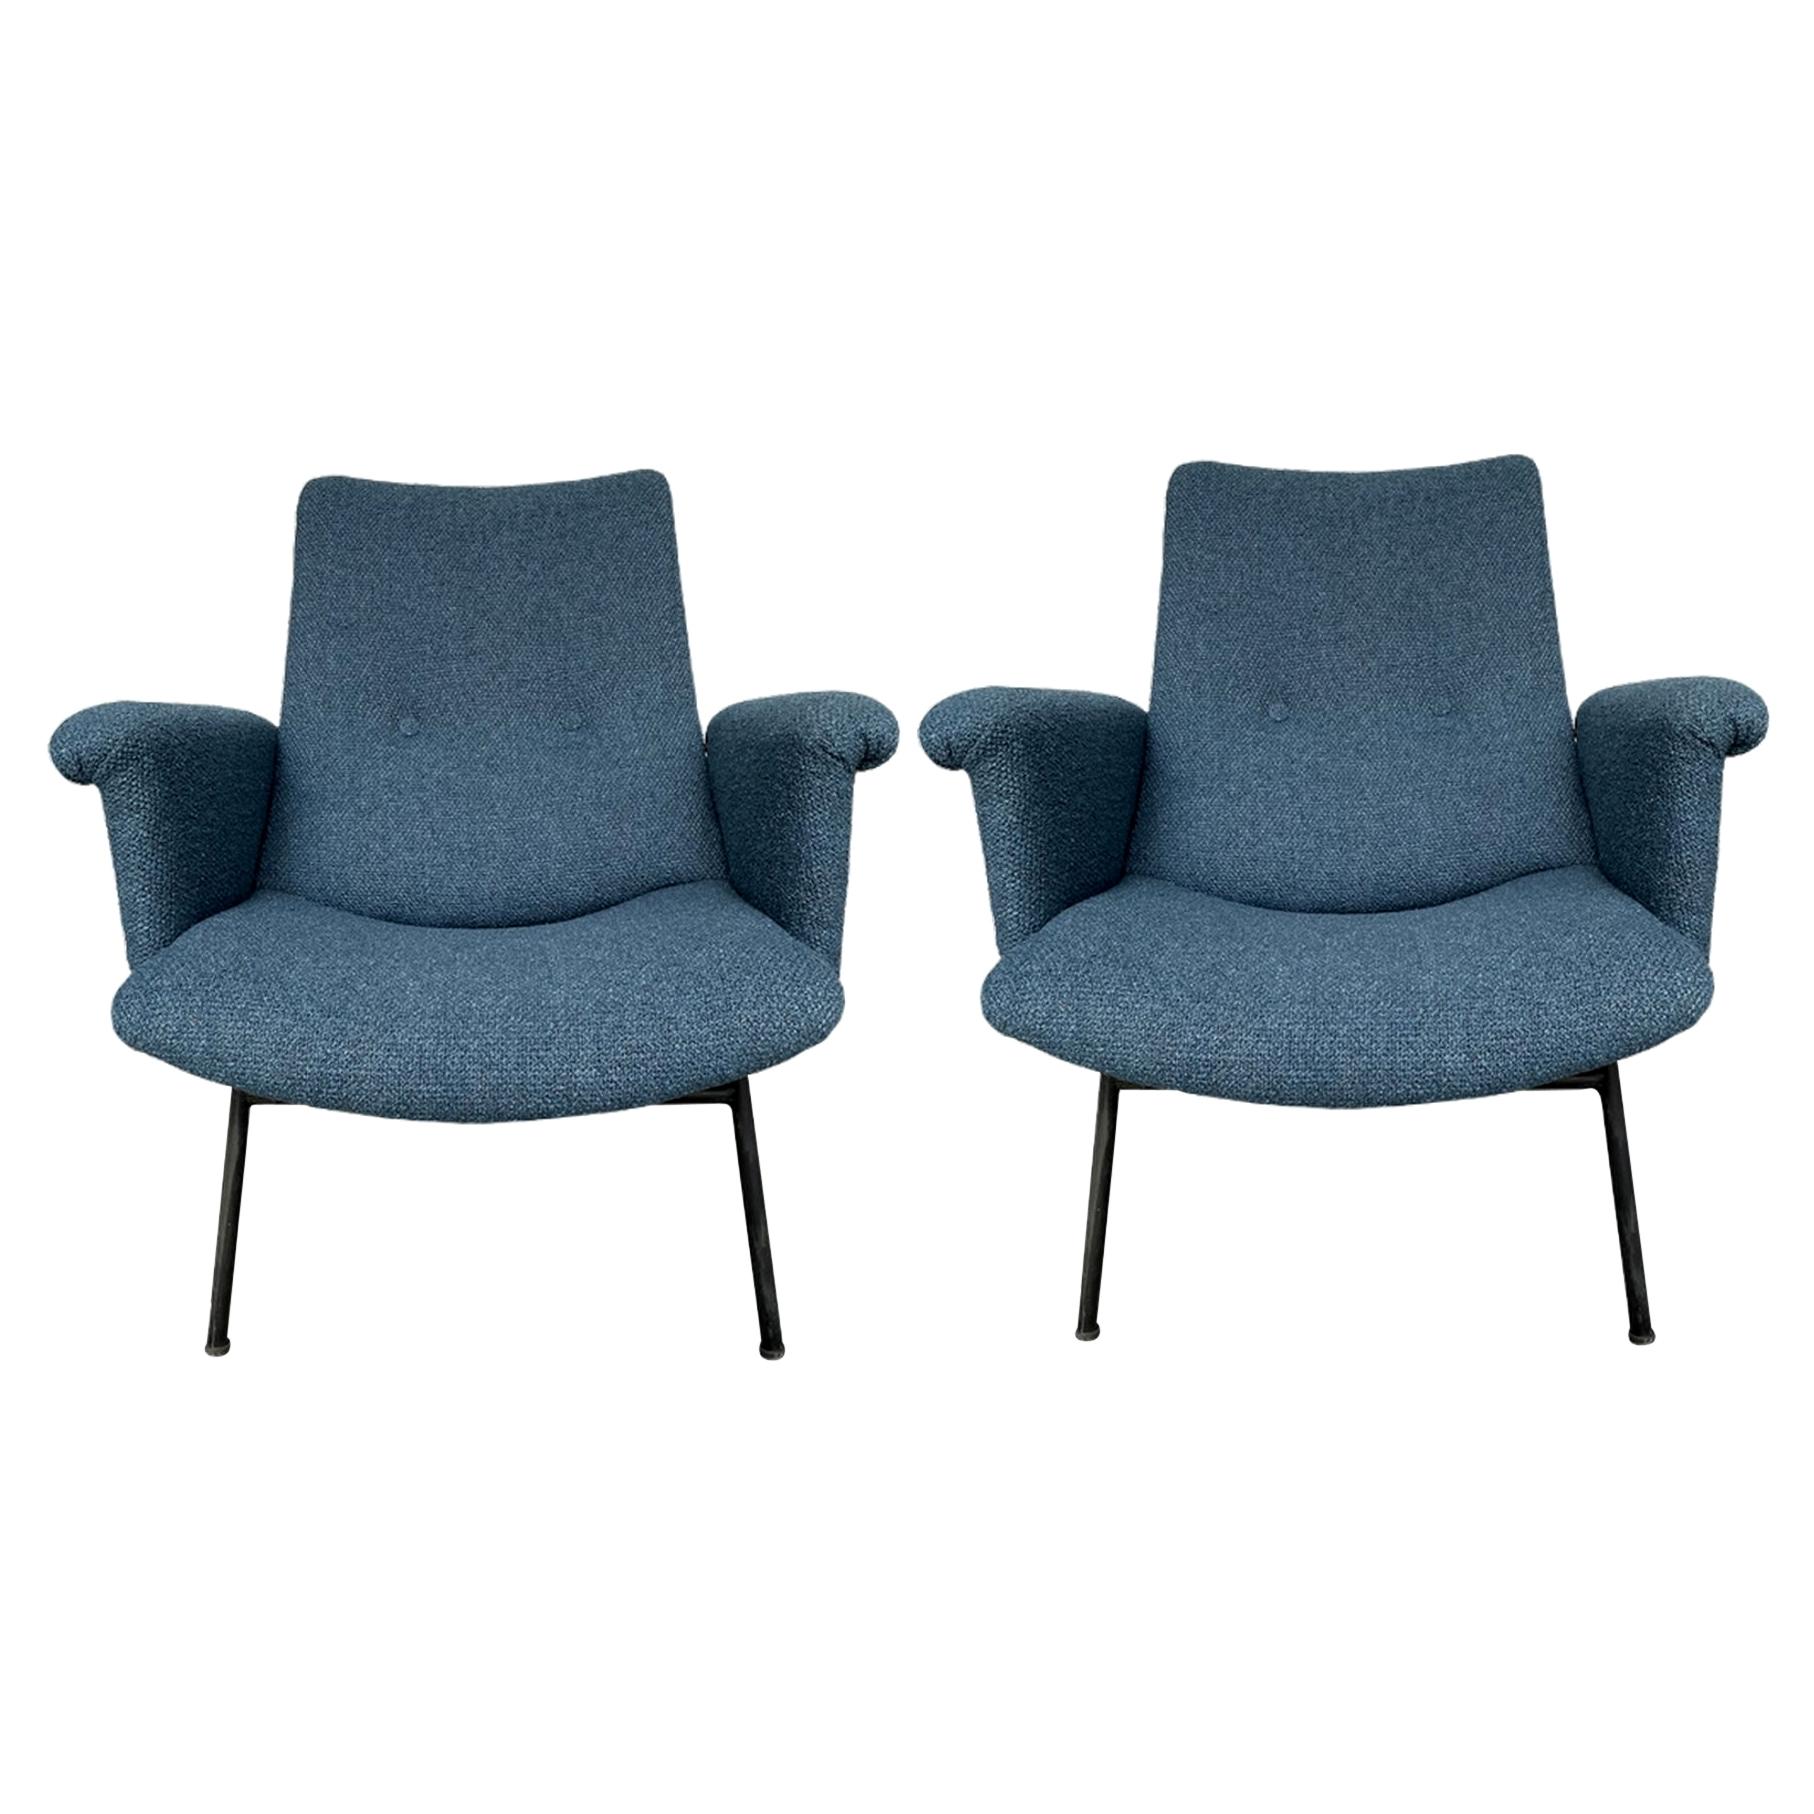 Pair of SK660 Armchairs by Pierre Guariche, Steiner Edition, 1953